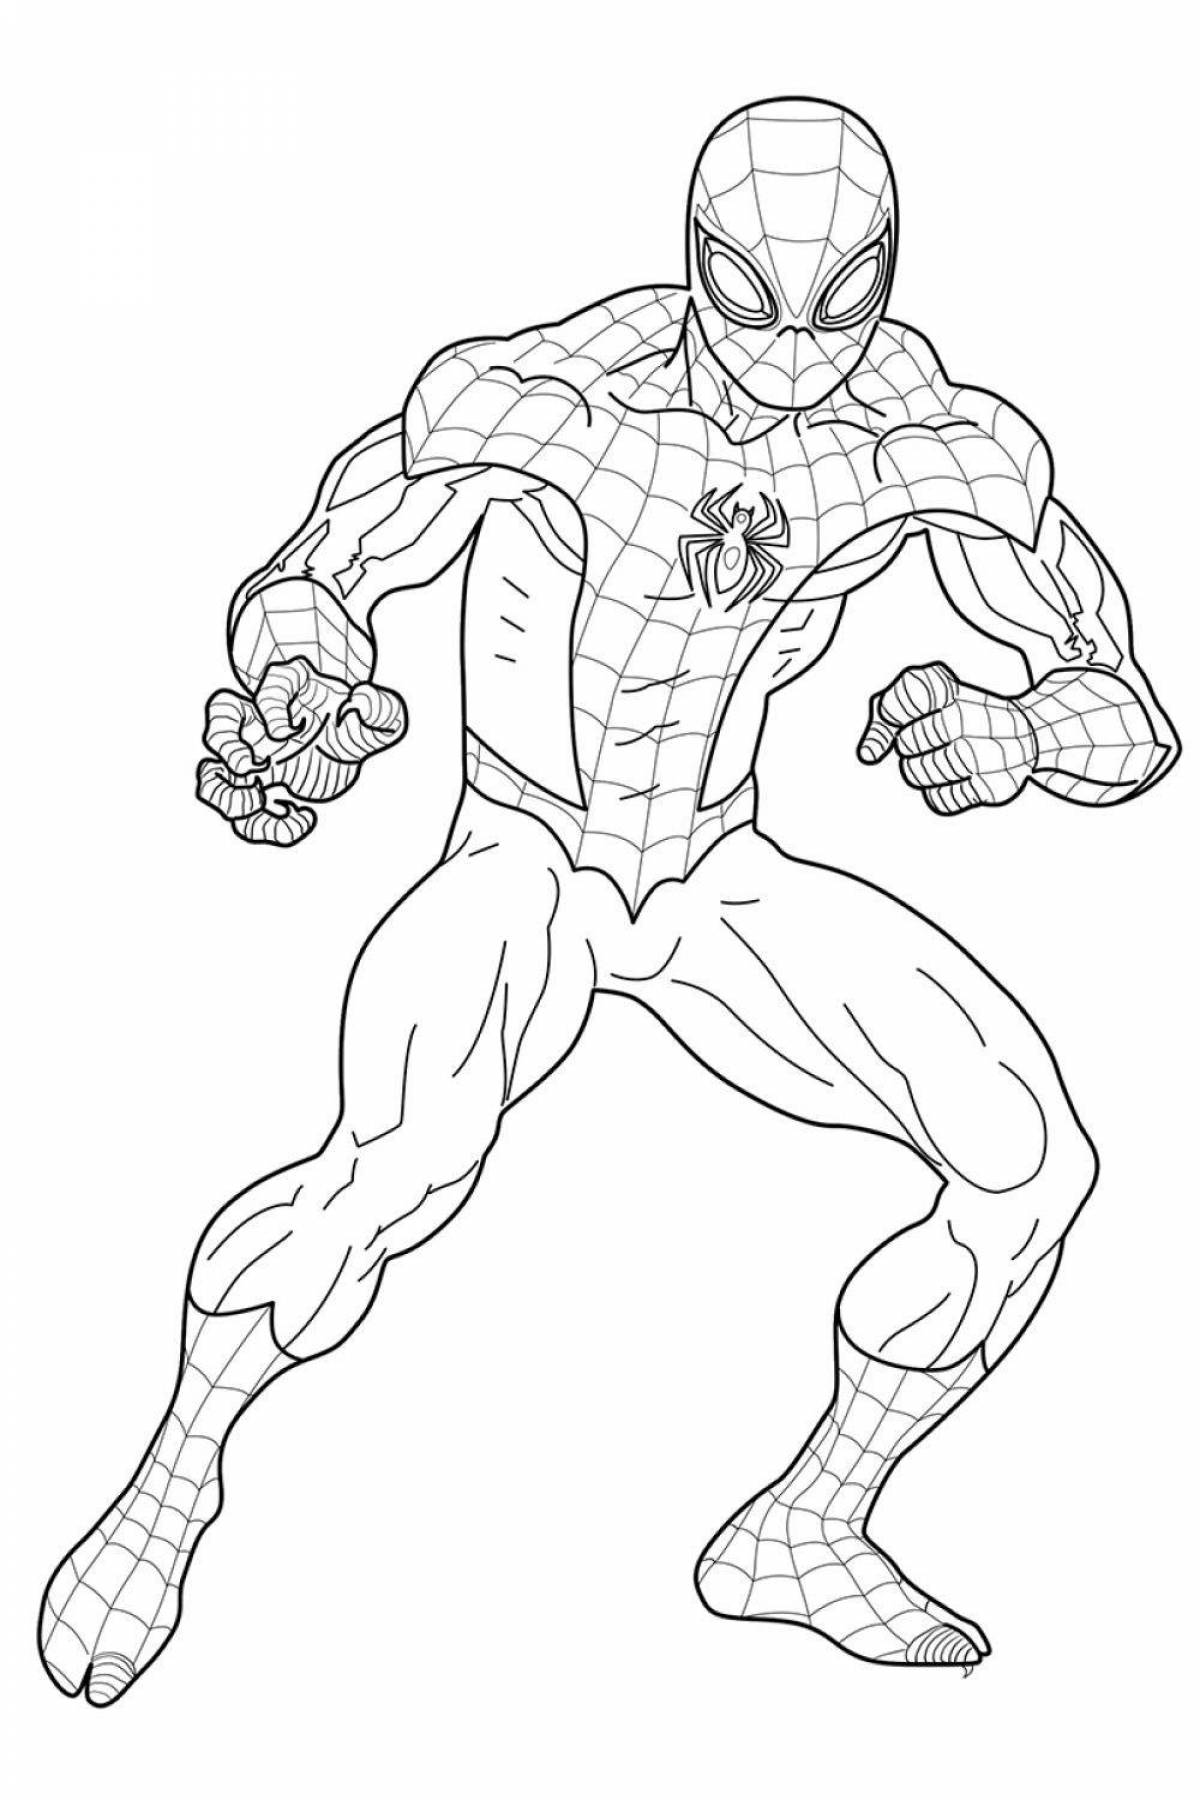 Majestic spider-man coloring book